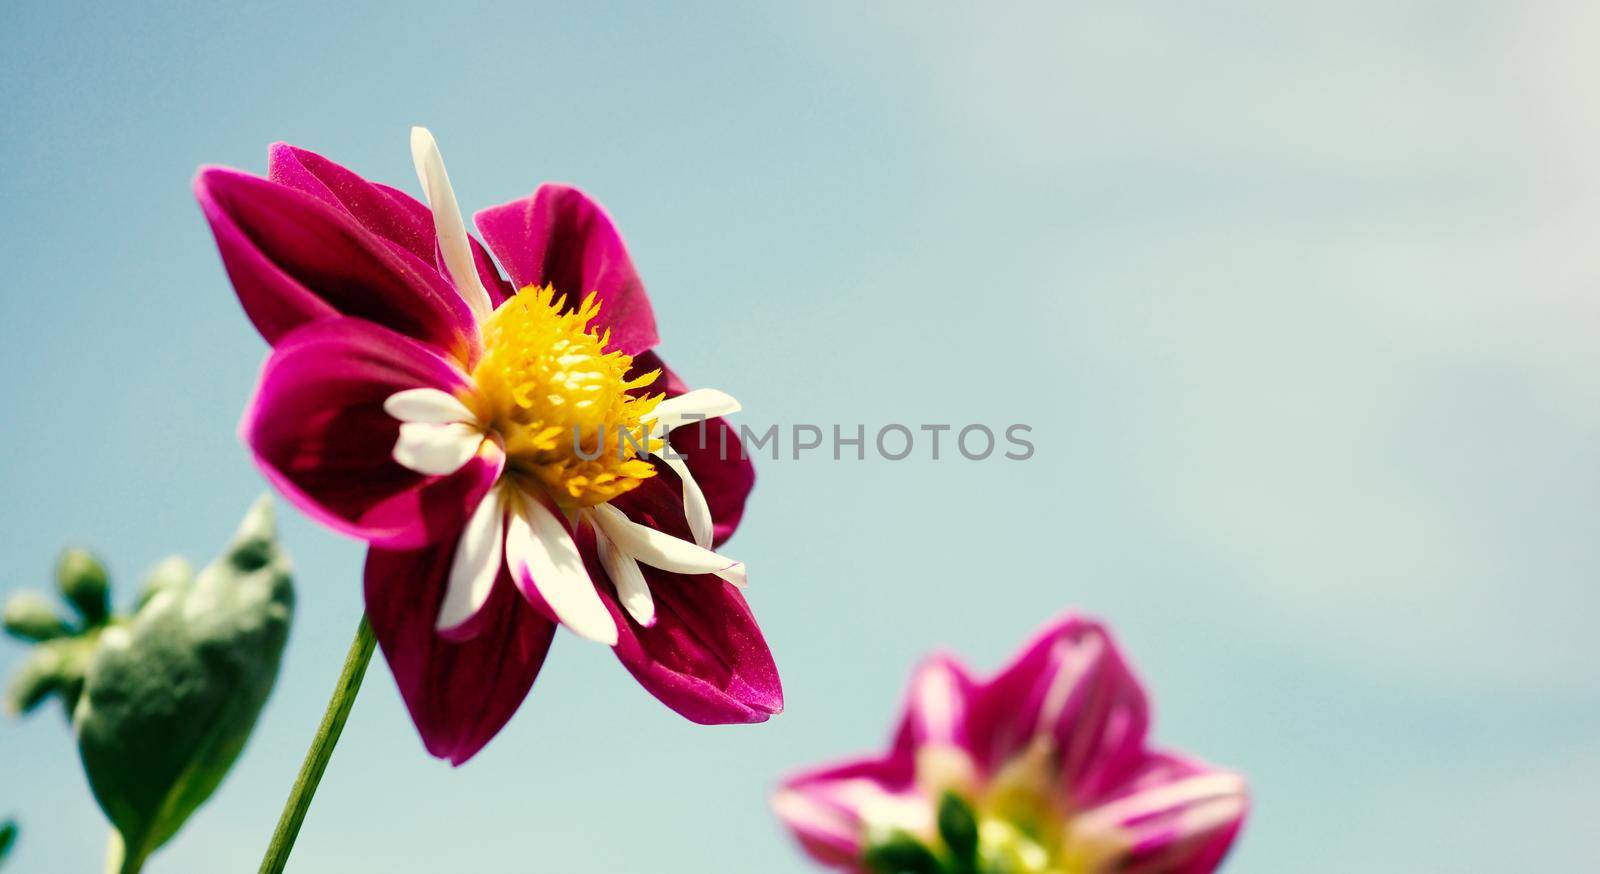 Close up images of red color Dahlia flowers and clear light blue sky in Furano province Northen part of Hokkaido Japan on summer season around August or September.